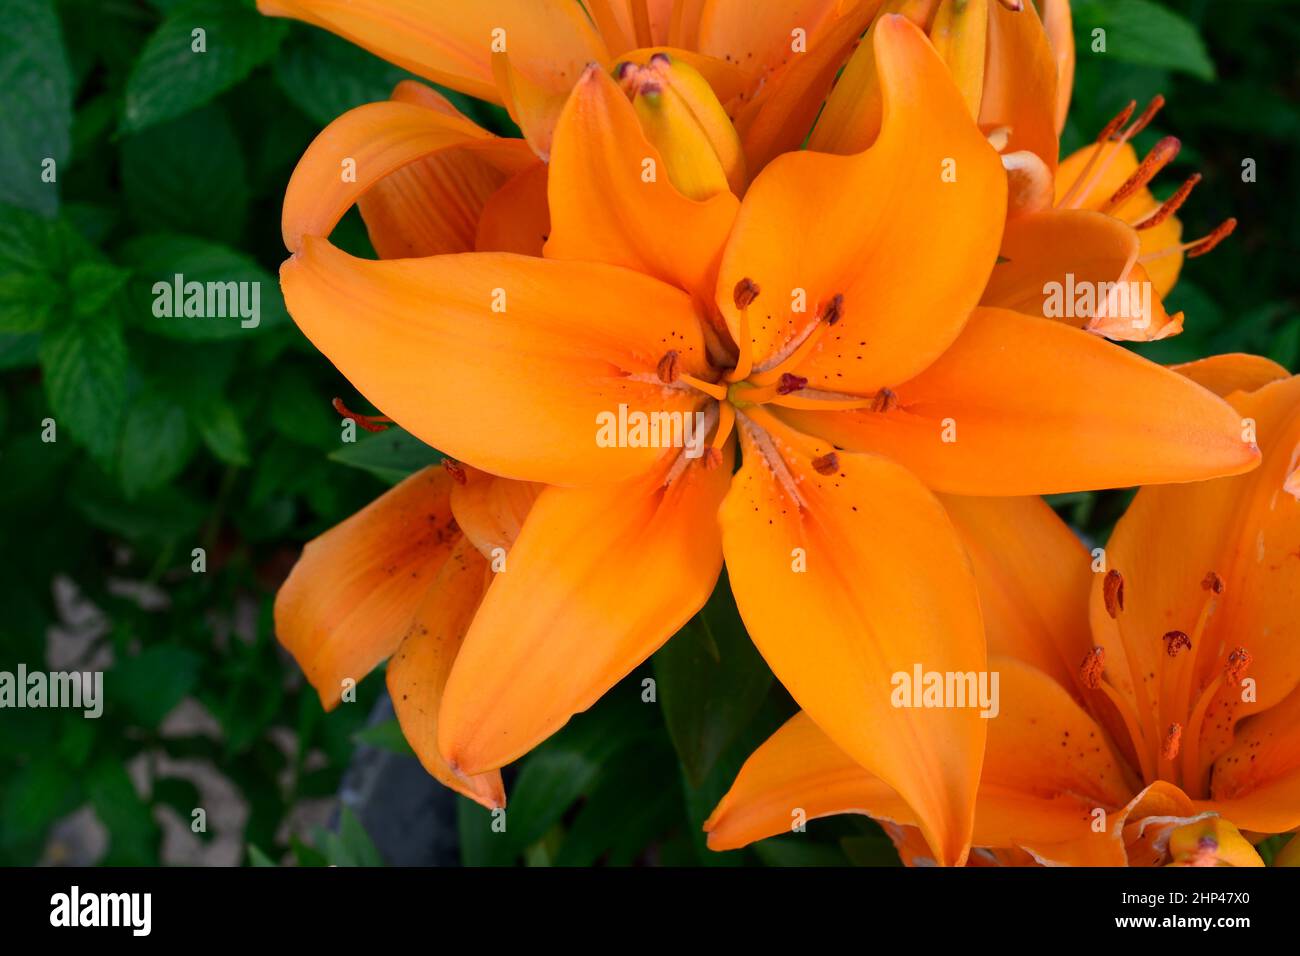 Lilium or Asiatic Lily. Close up of orange flower with pointed petals. Stock Photo